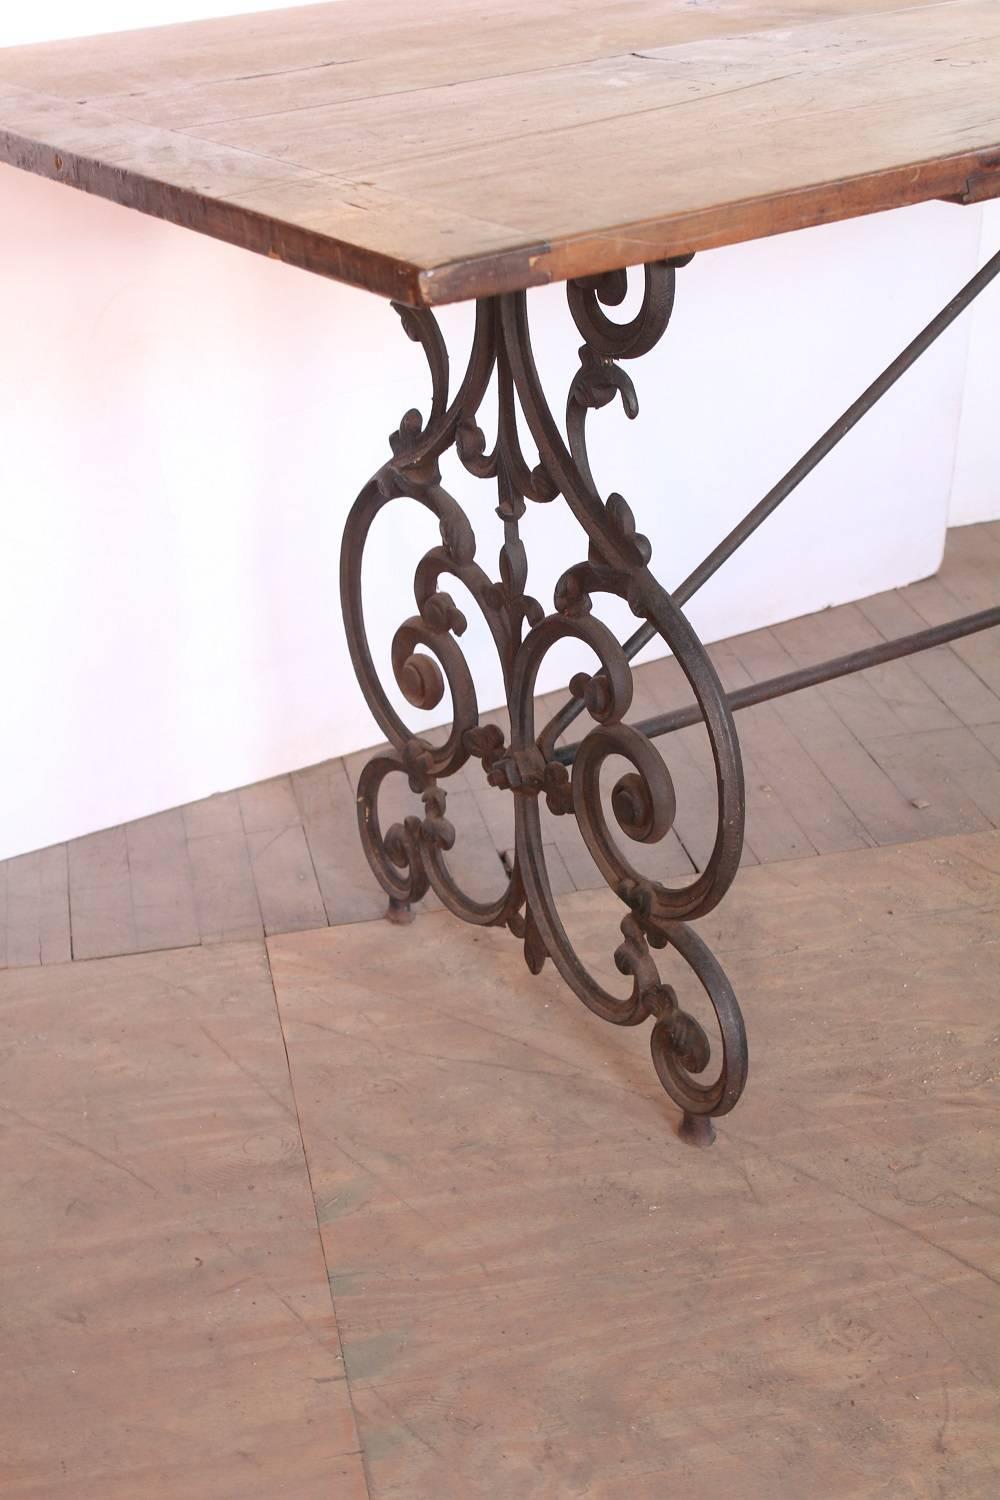 American wrought iron and wood base table, circa 1900s.